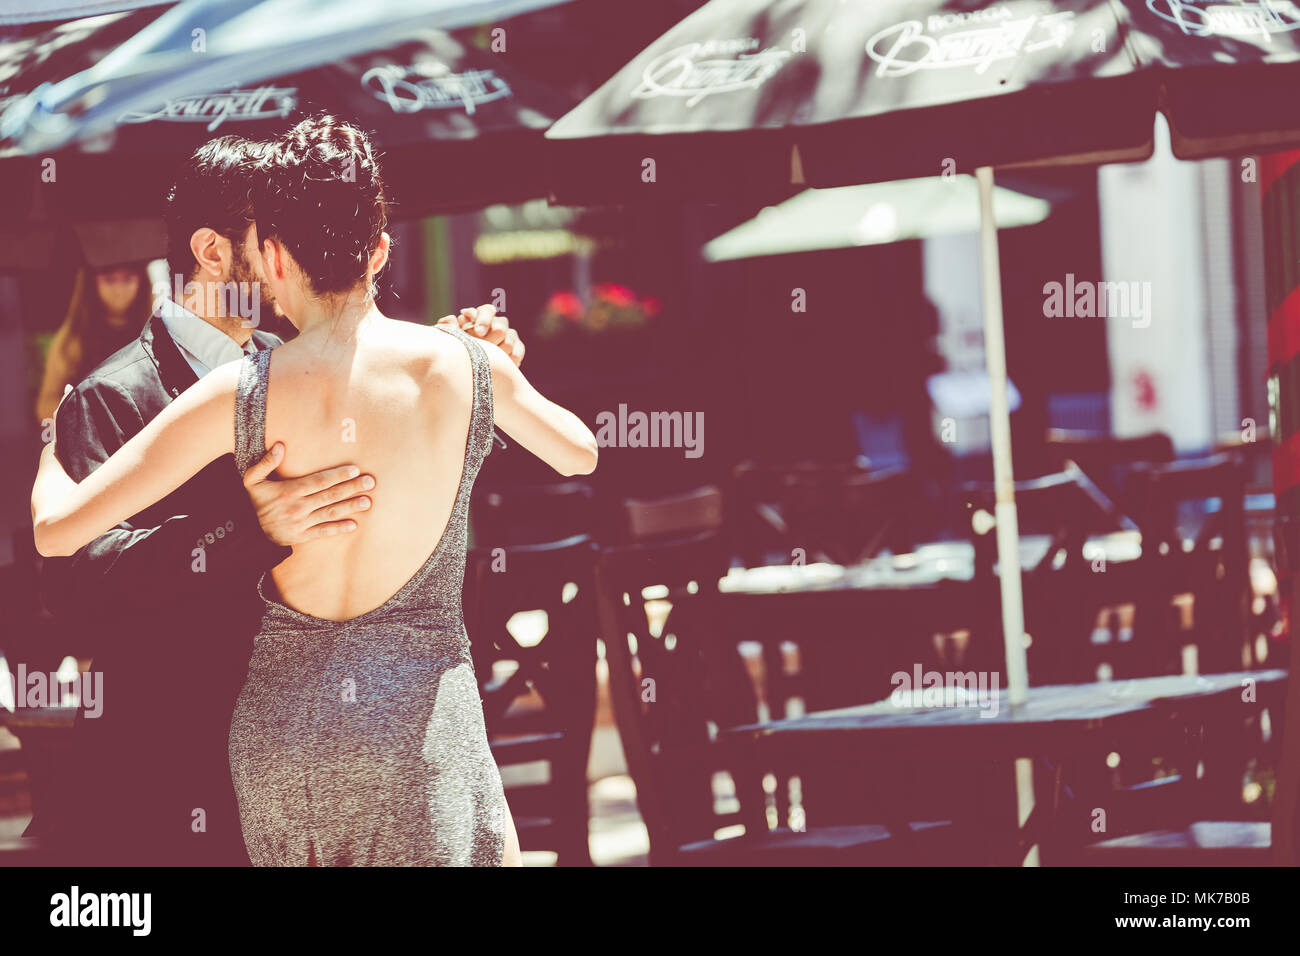 BUENOS AIRES, ARGENTINA - JANUARY 30, 2018: Unidentified couple dancing tango in the street in Buenos Aires, Argentina. Stock Photo